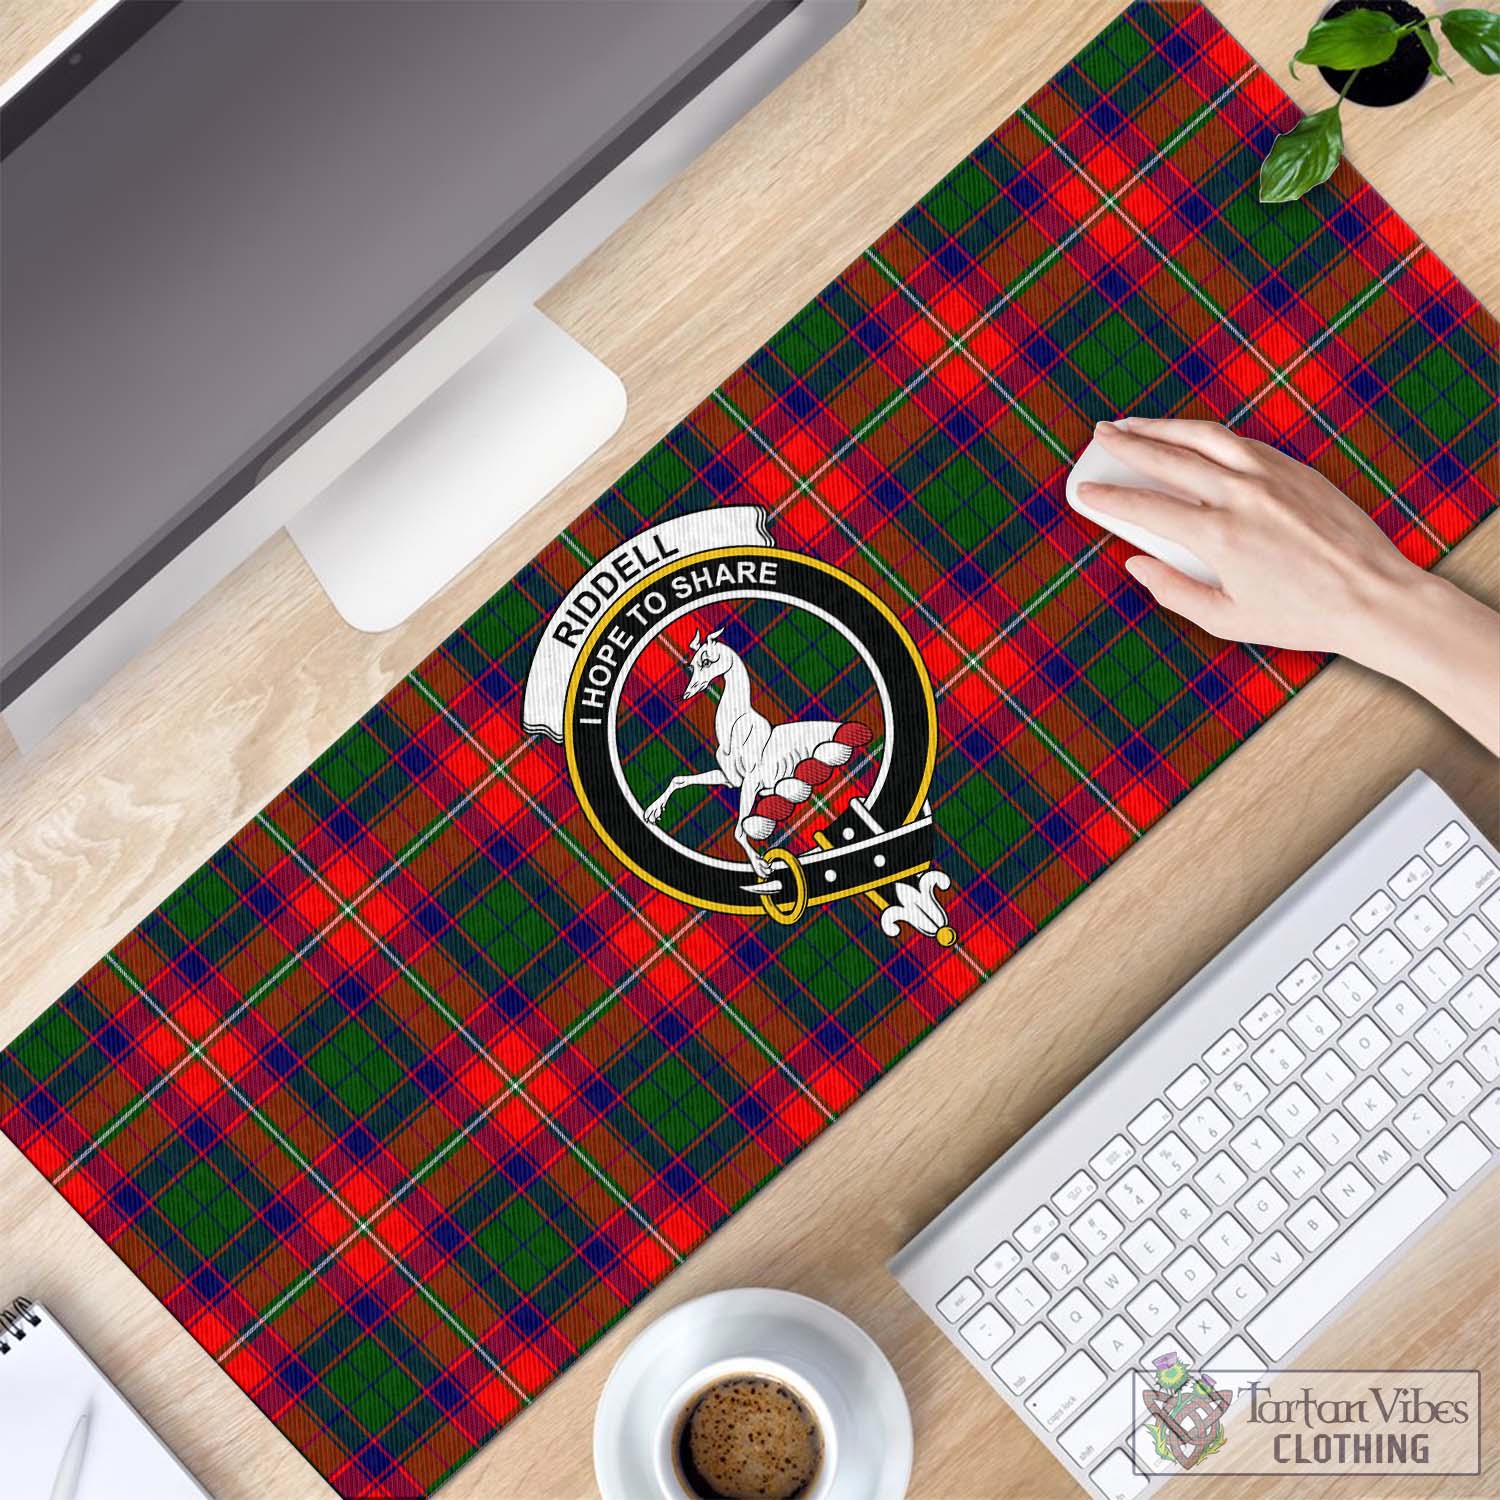 Tartan Vibes Clothing Riddell Tartan Mouse Pad with Family Crest